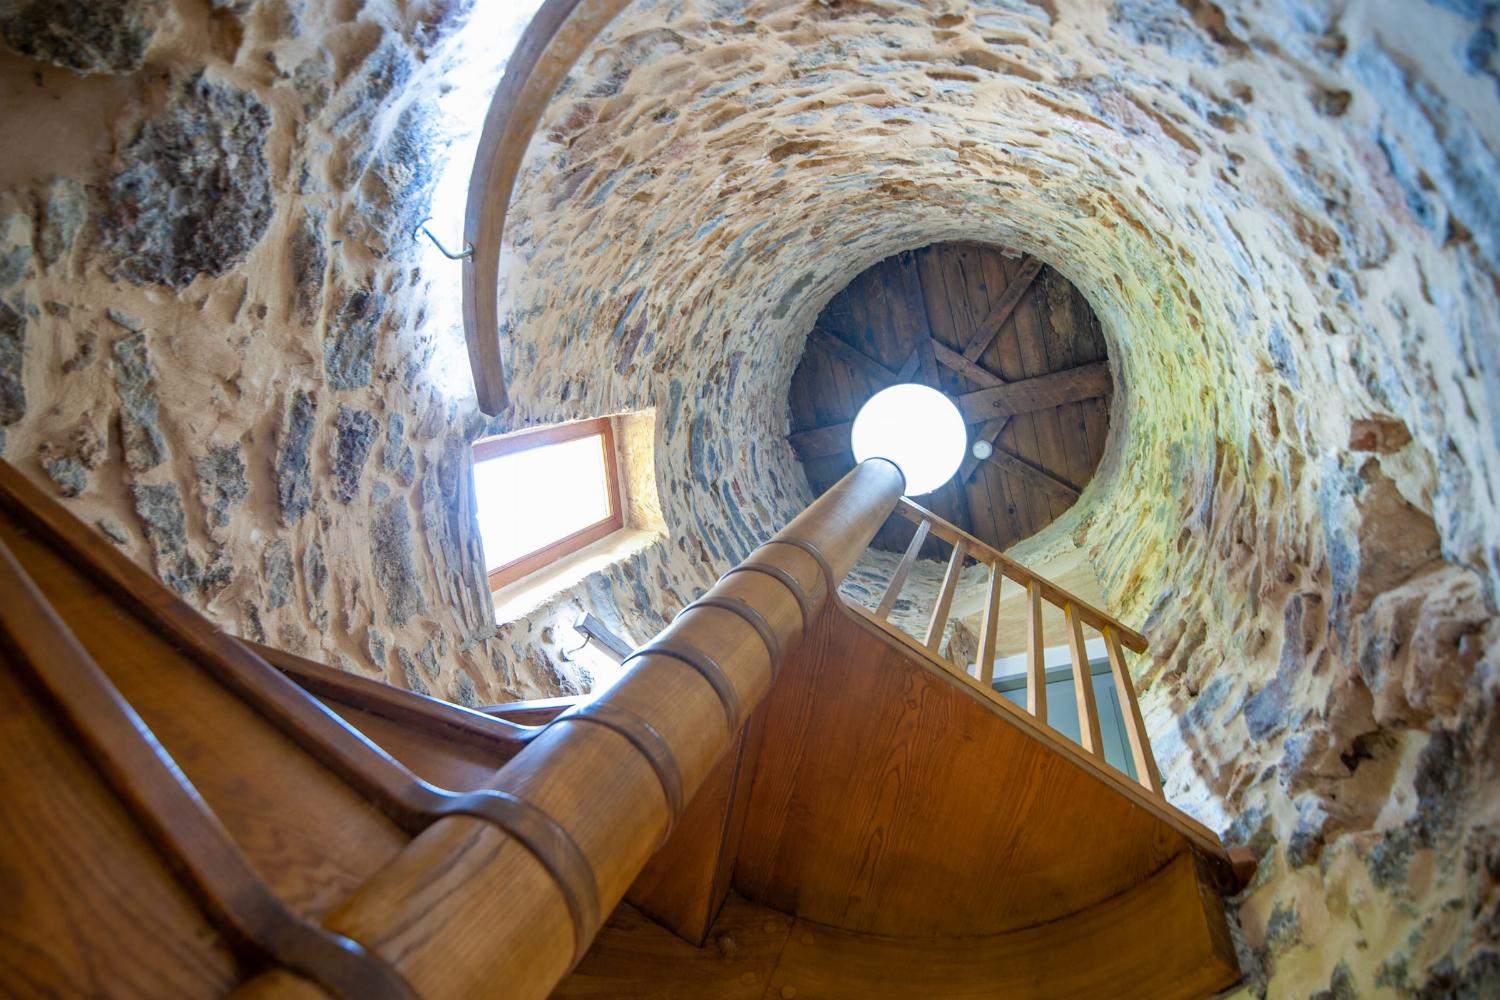 Staircase | Holiday accommodation in the South of France